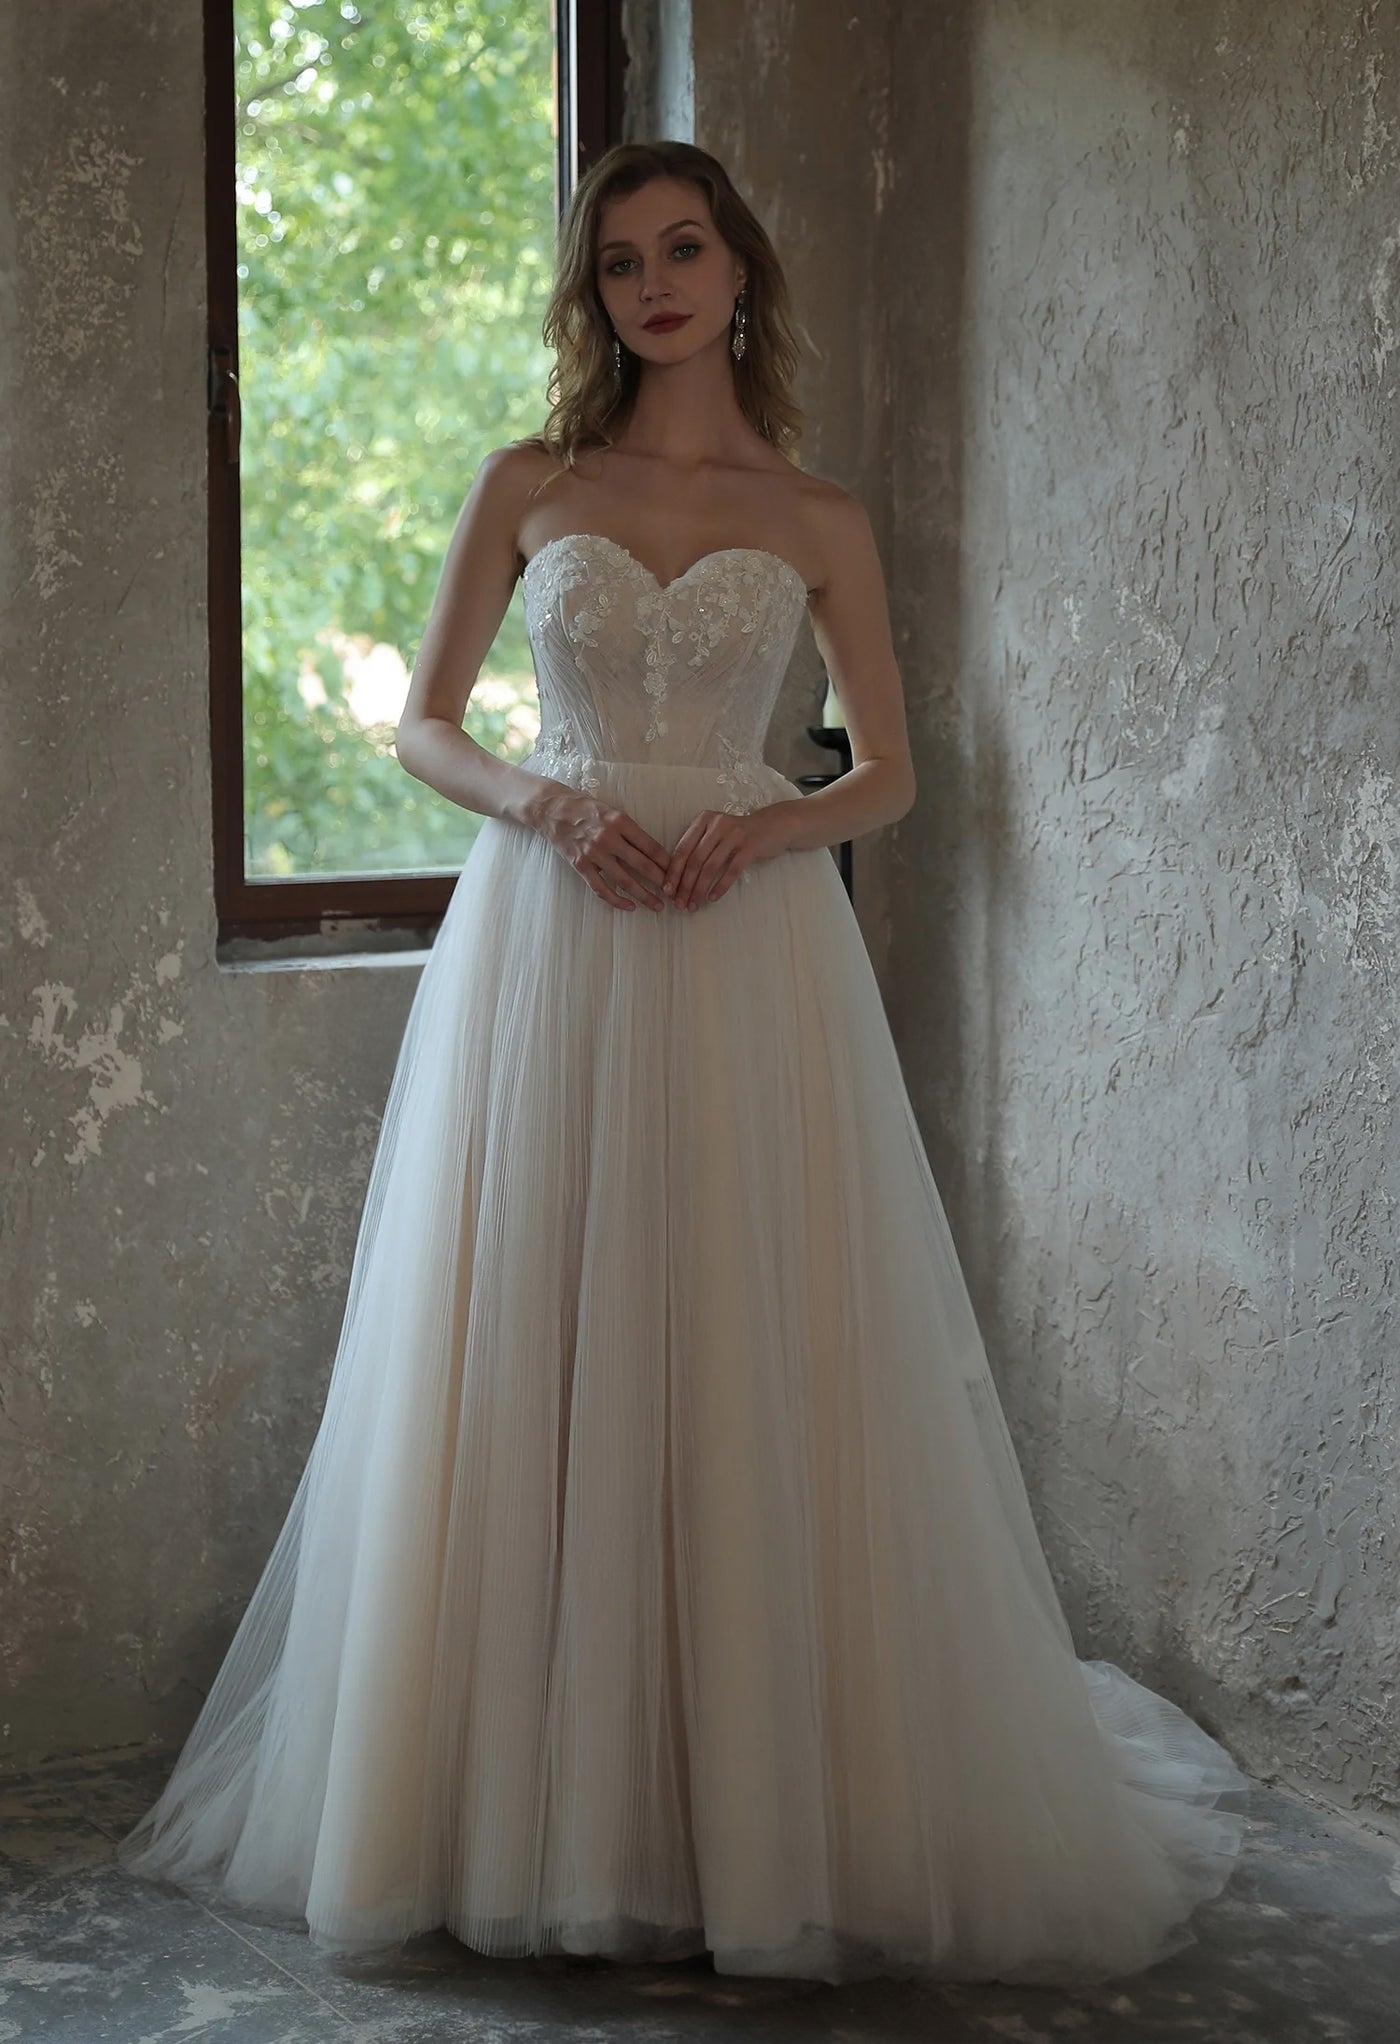 An Enchanting Pleated Tulle A-line Wedding Dress With Puff Sleeves by Bergamot Bridal in a bridal shop in London standing in an empty room.